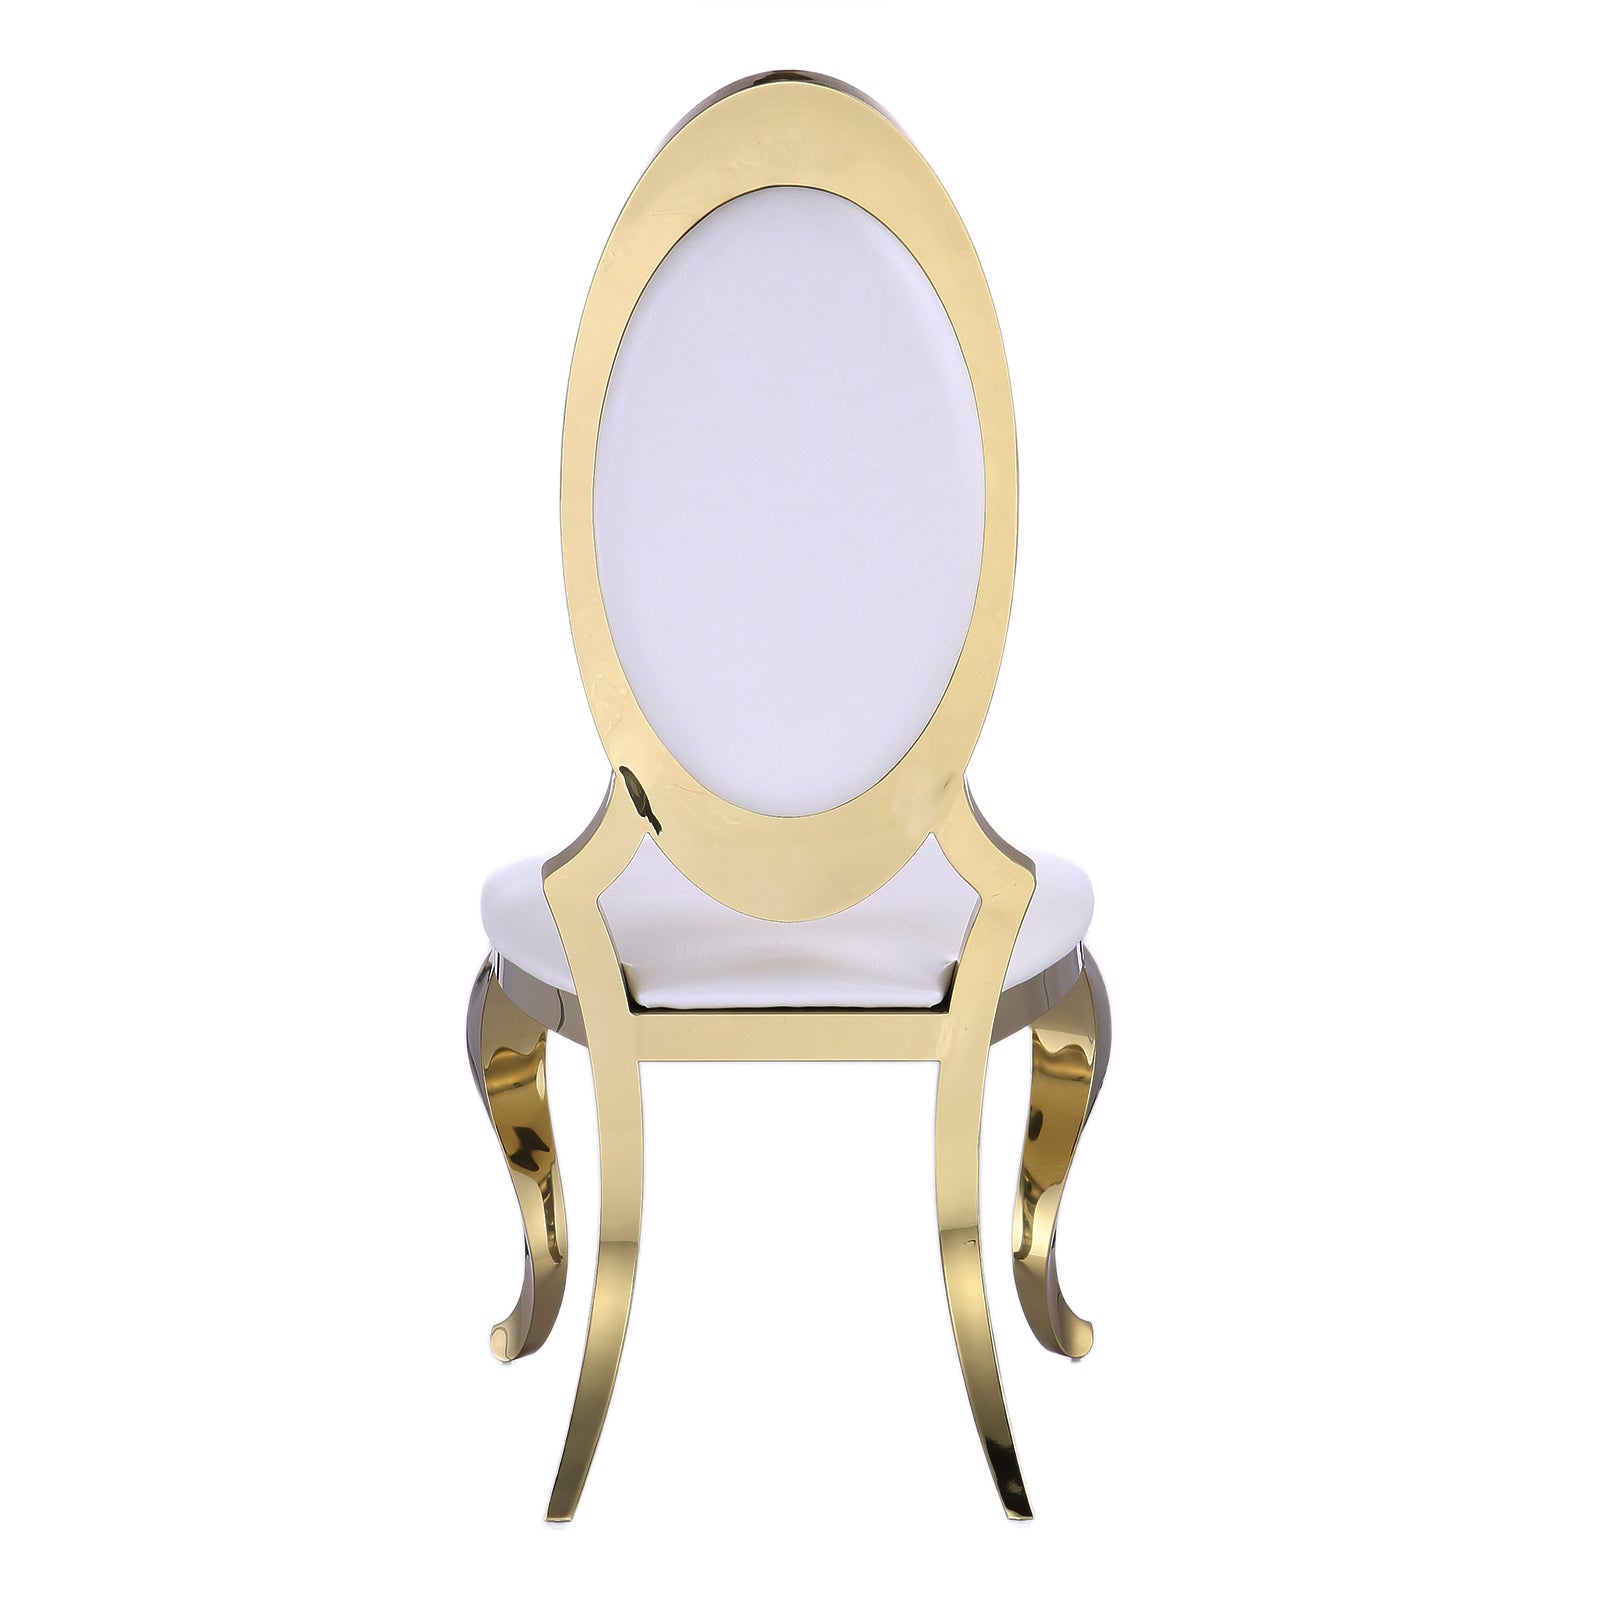 703 Set | AUZ White and Gold Dining room Sets for 6